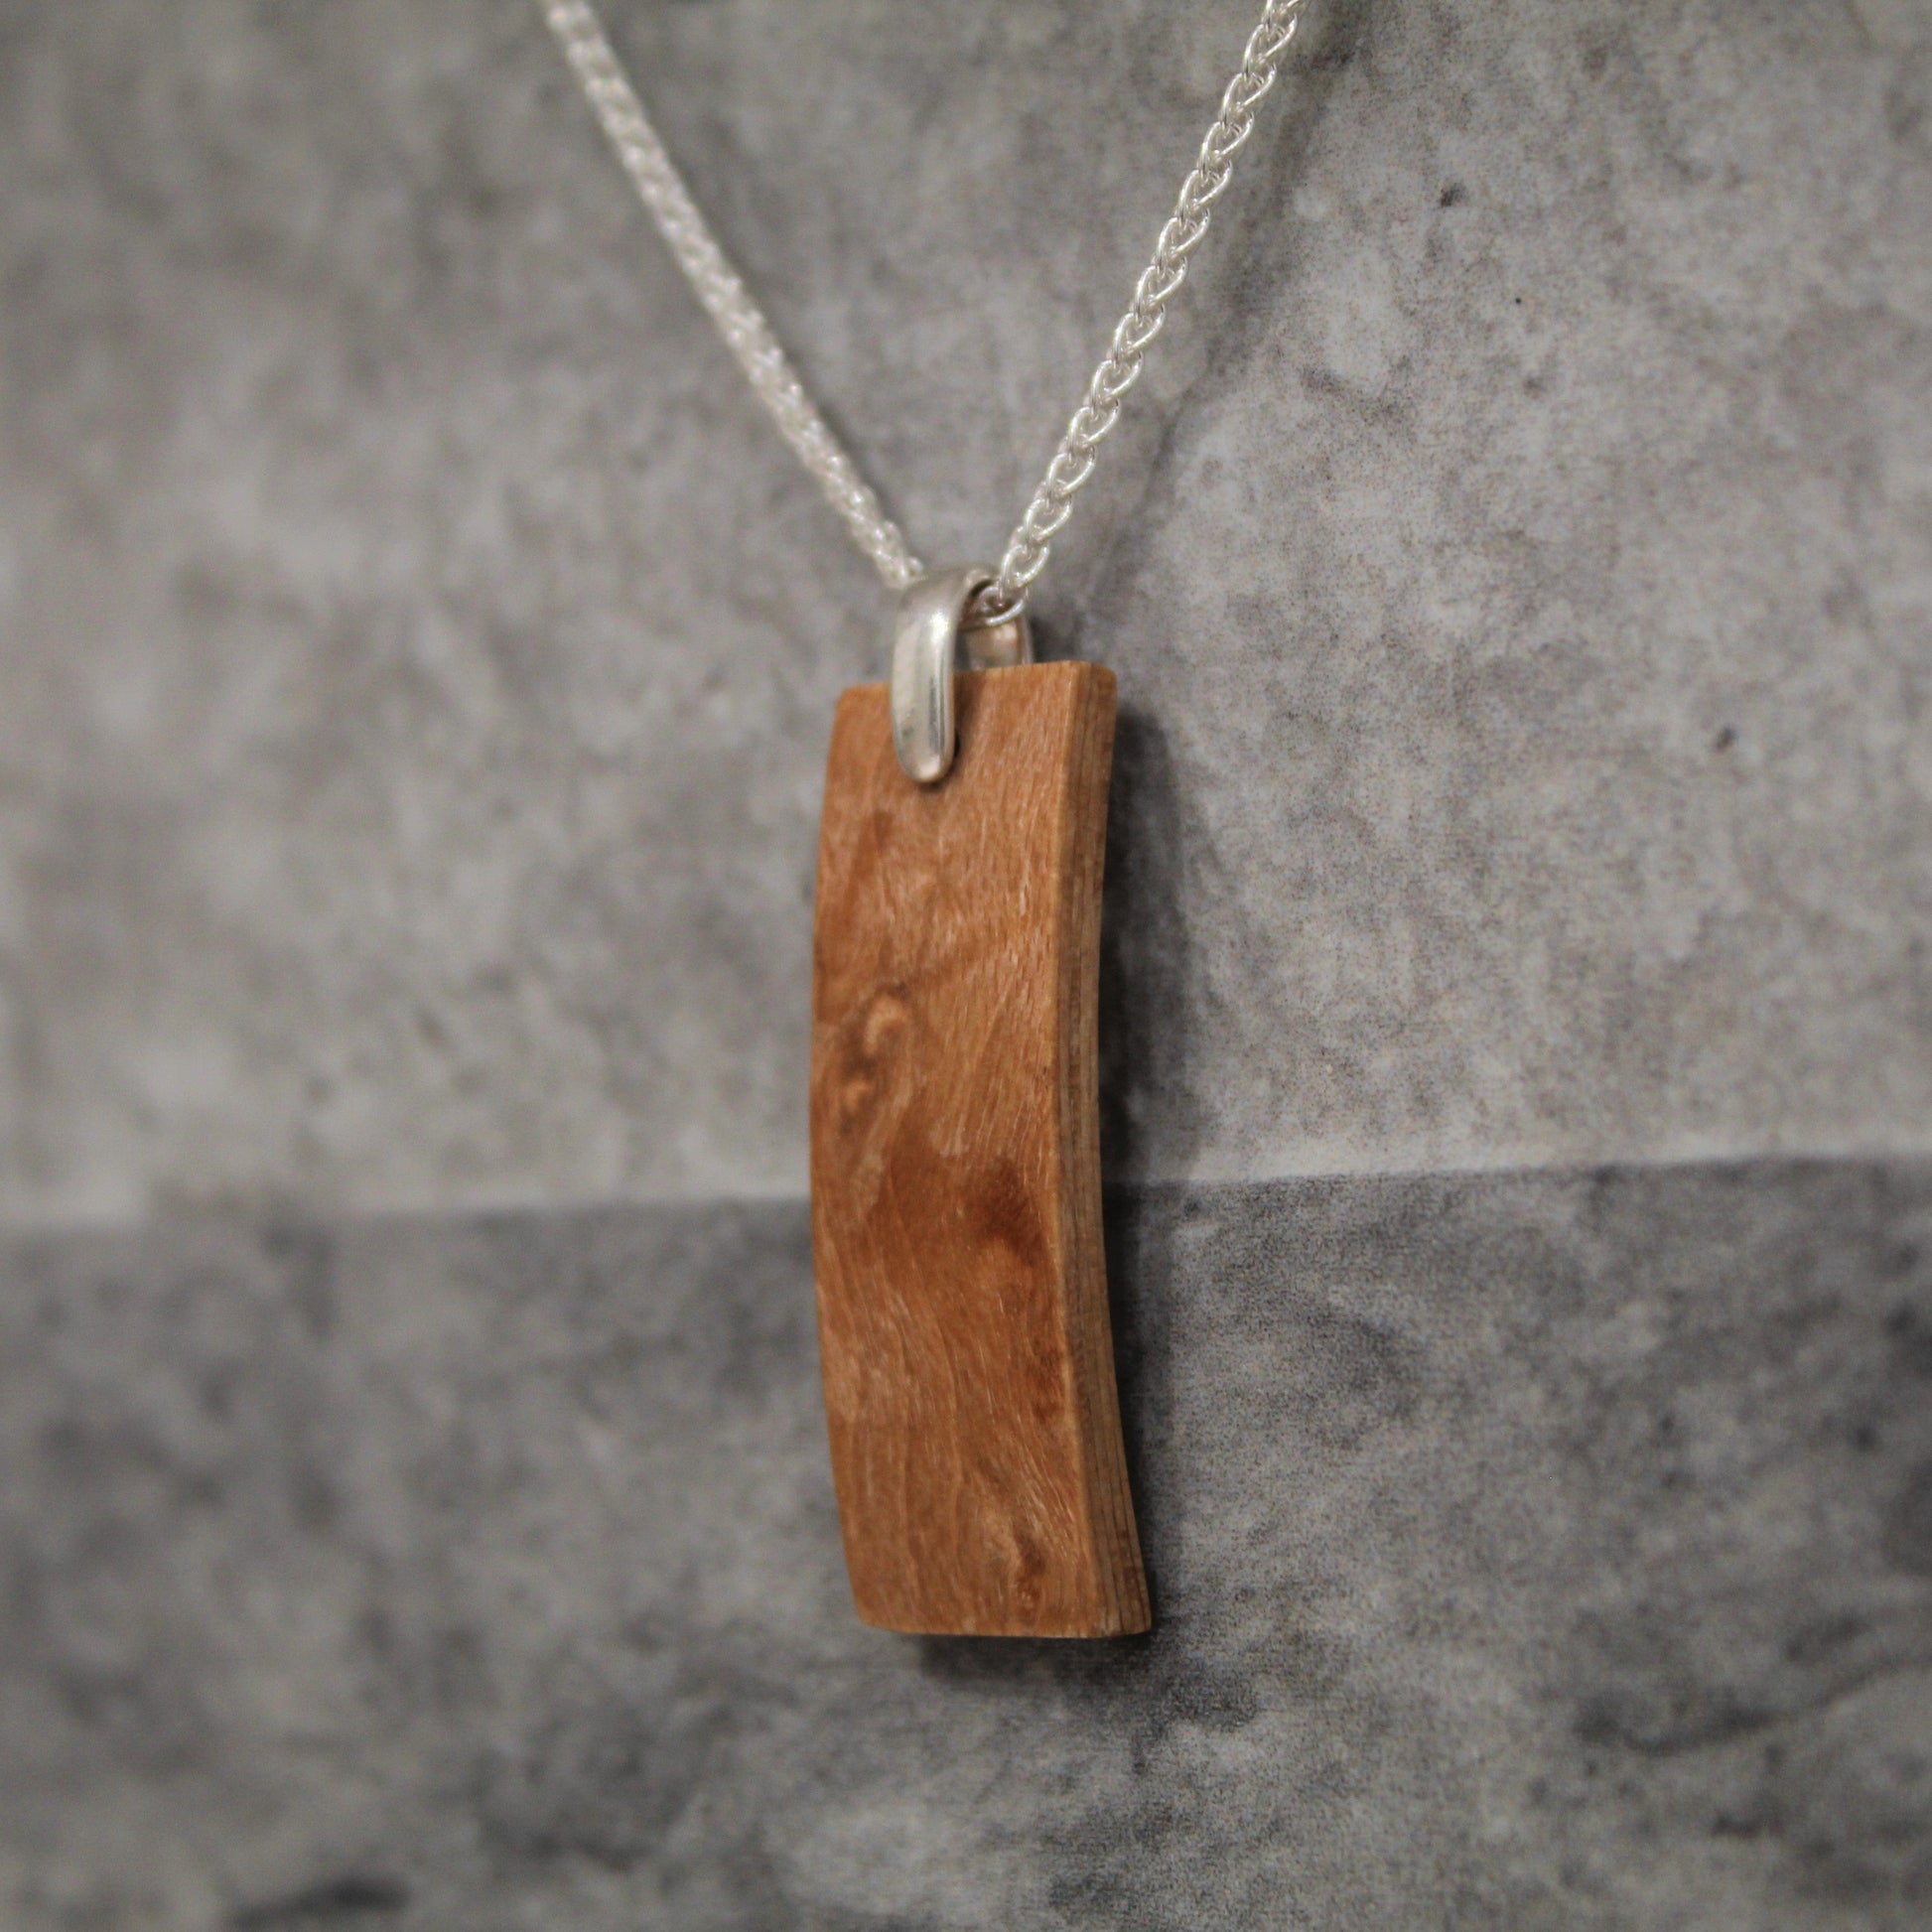 Maple wood pendant with silver chain